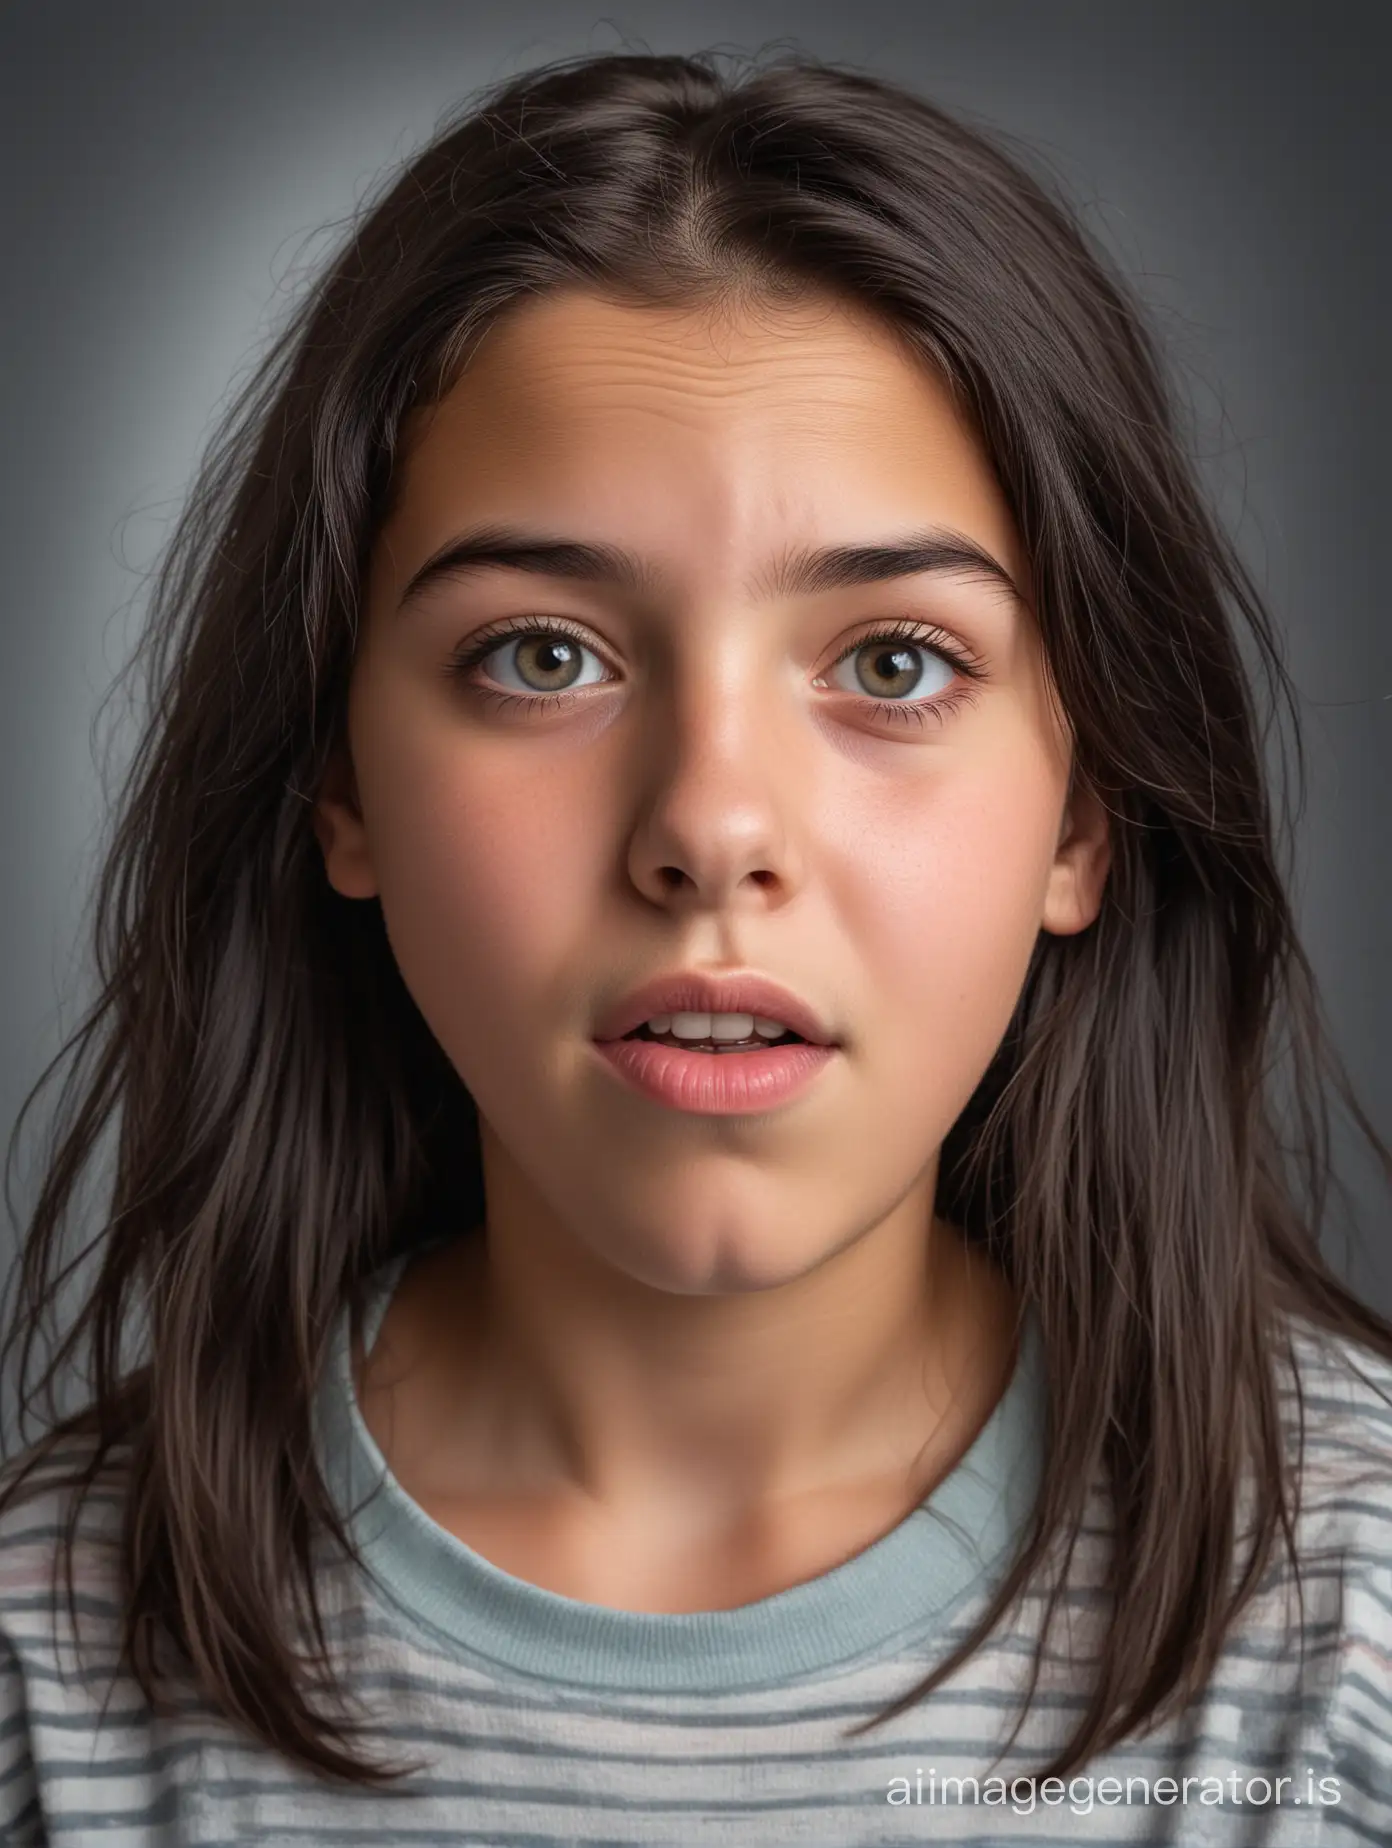 Portrait-of-a-Deeply-Surprised-12YearOld-Girl-with-Dark-Hair